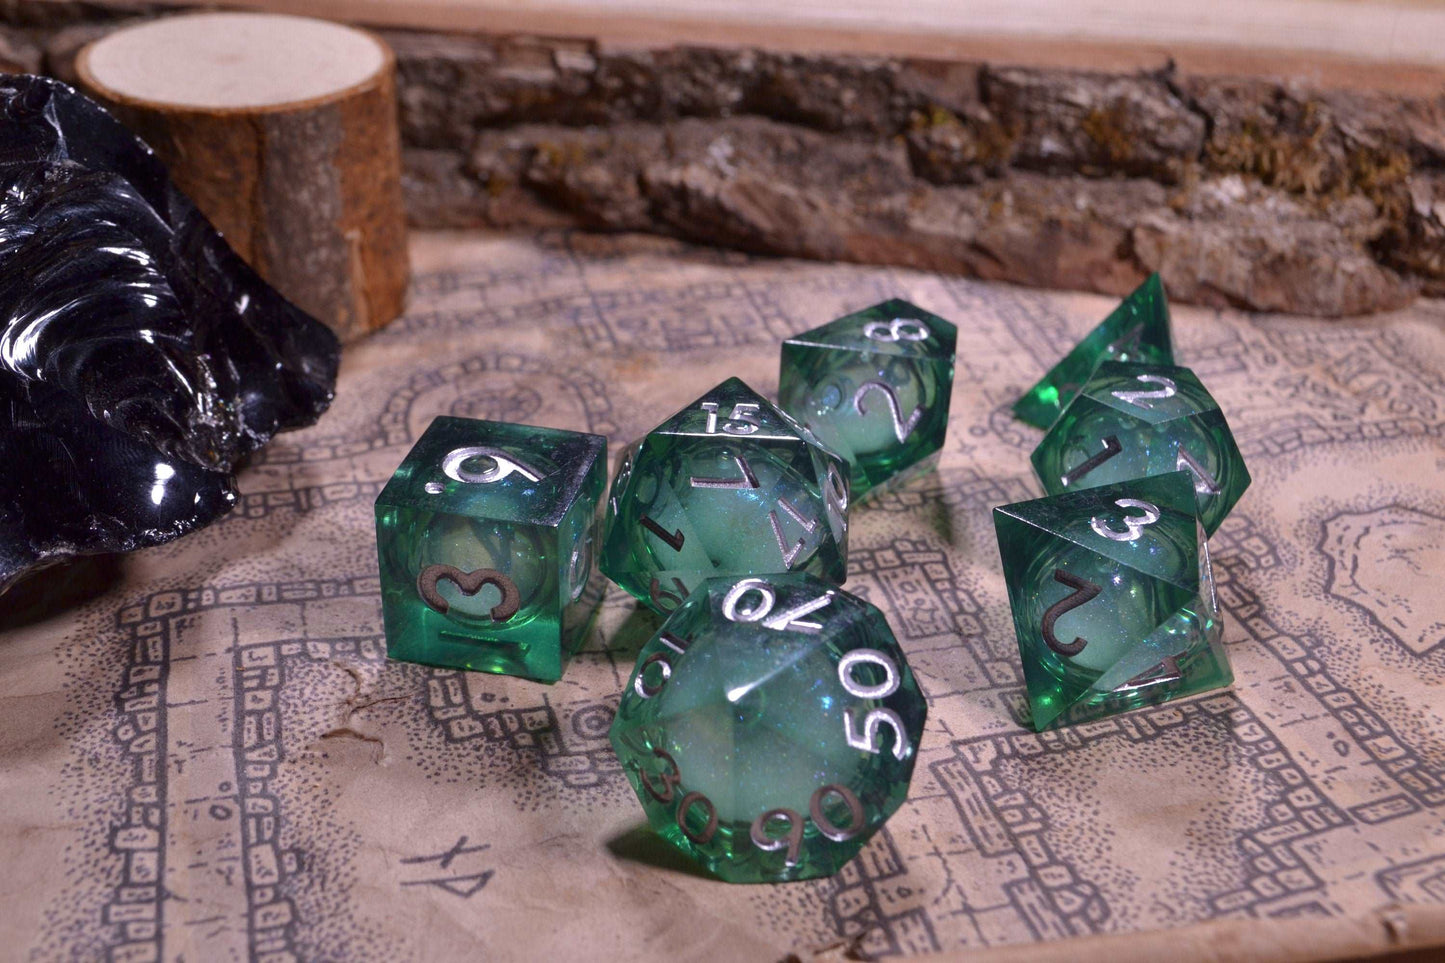 Eldritch Fae Green Sharp Edge Liquid Core Resin D&D Dice Set With Metallic Silver Numbering - For Dungeons and Dragons - Gift Set